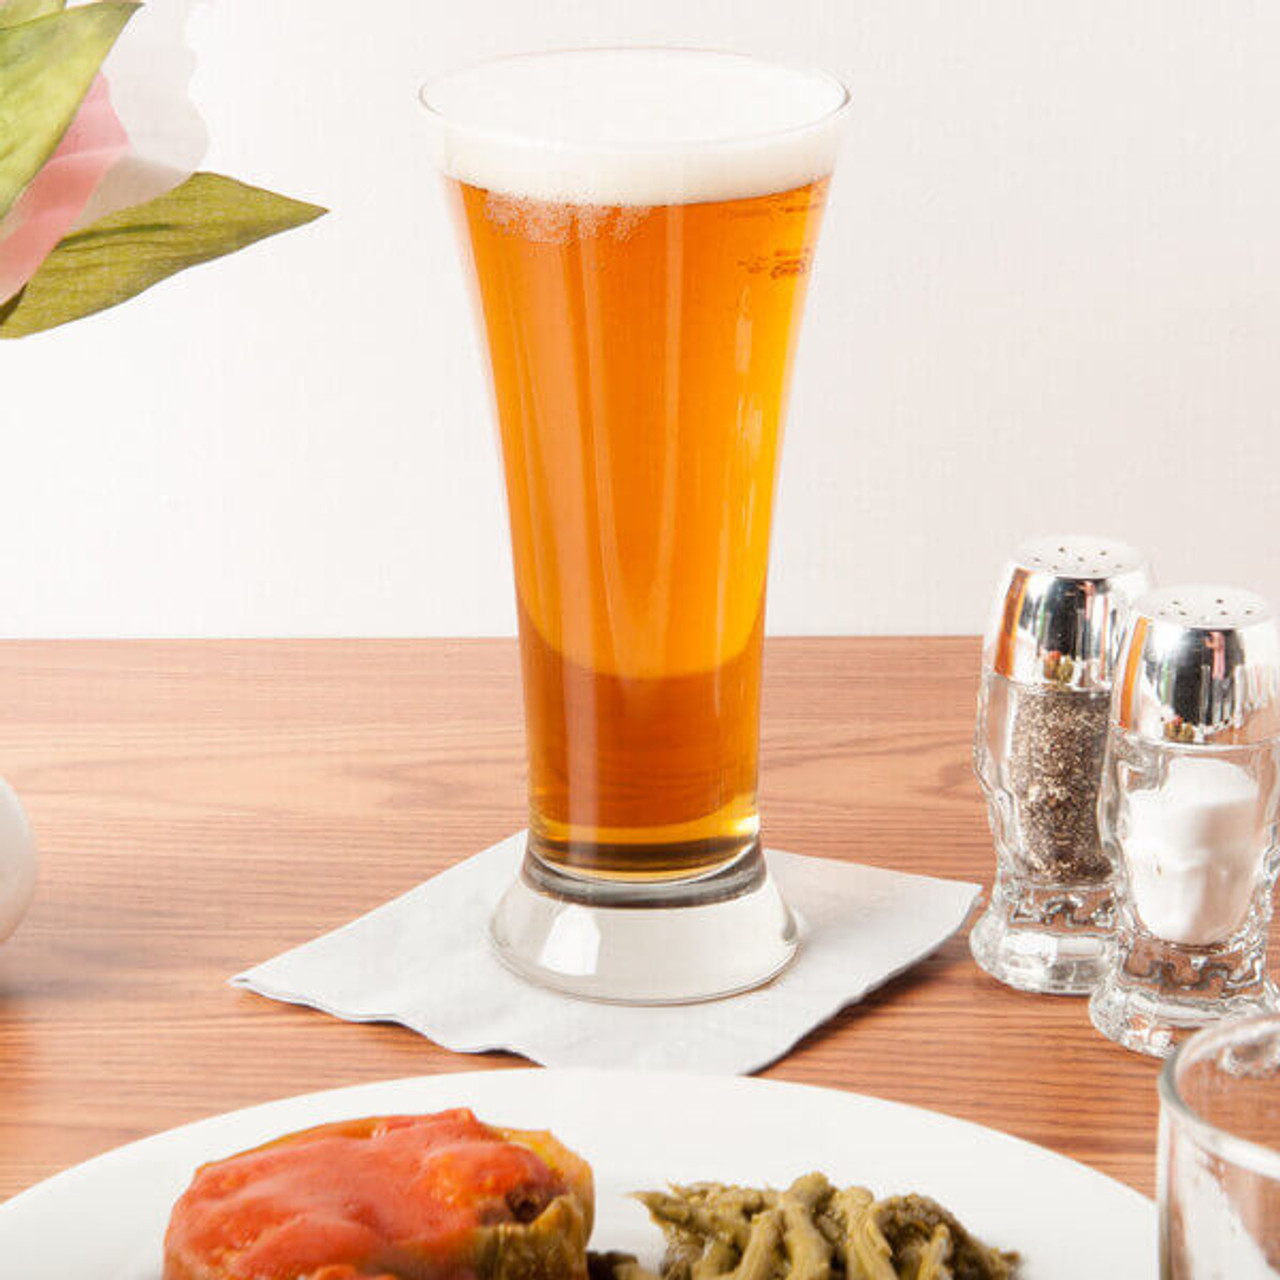 Libbey 1242HT 19 1/4 oz Pilsner Glass - Durable Heat-Treated Glass (12/Case) - Chicken Pieces